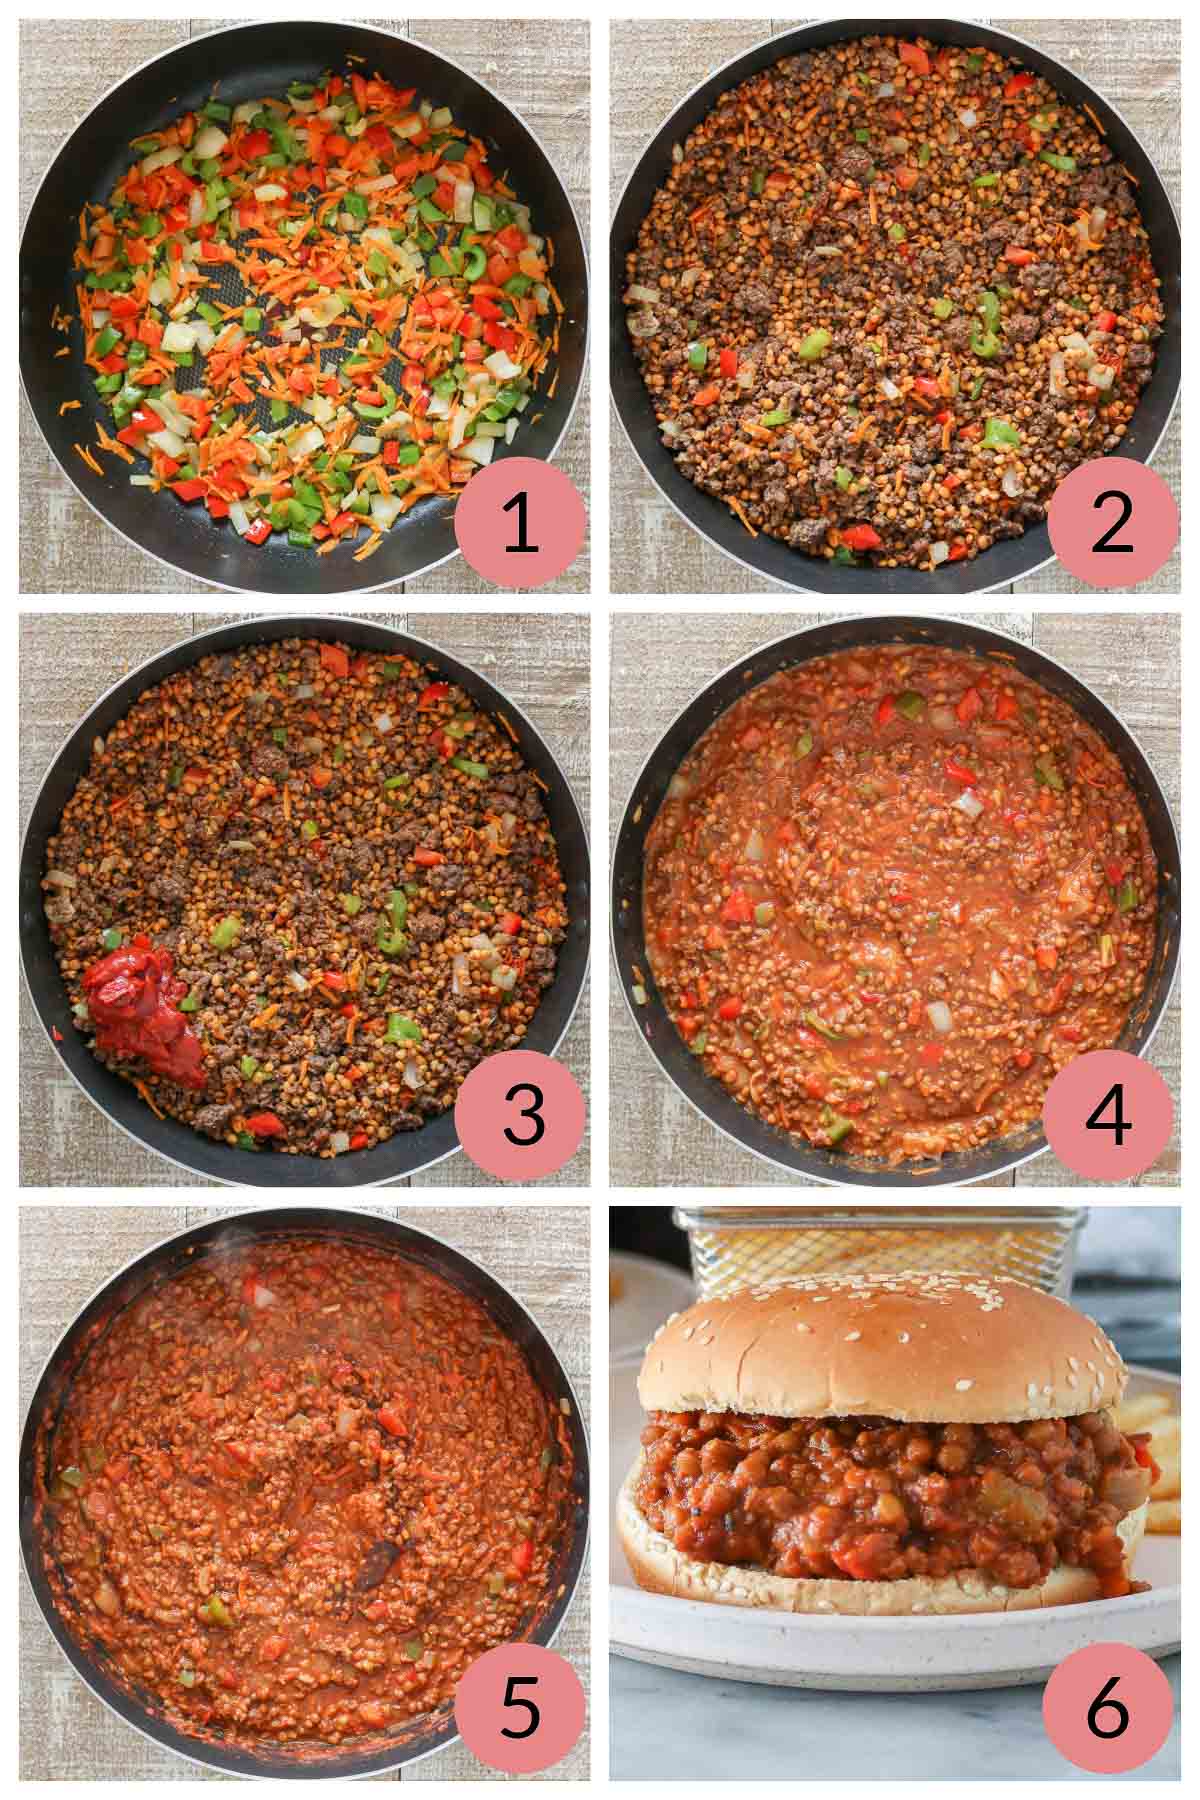 Collage of steps to make sloppy joes with lentils, veggie "meat" and vegetables.